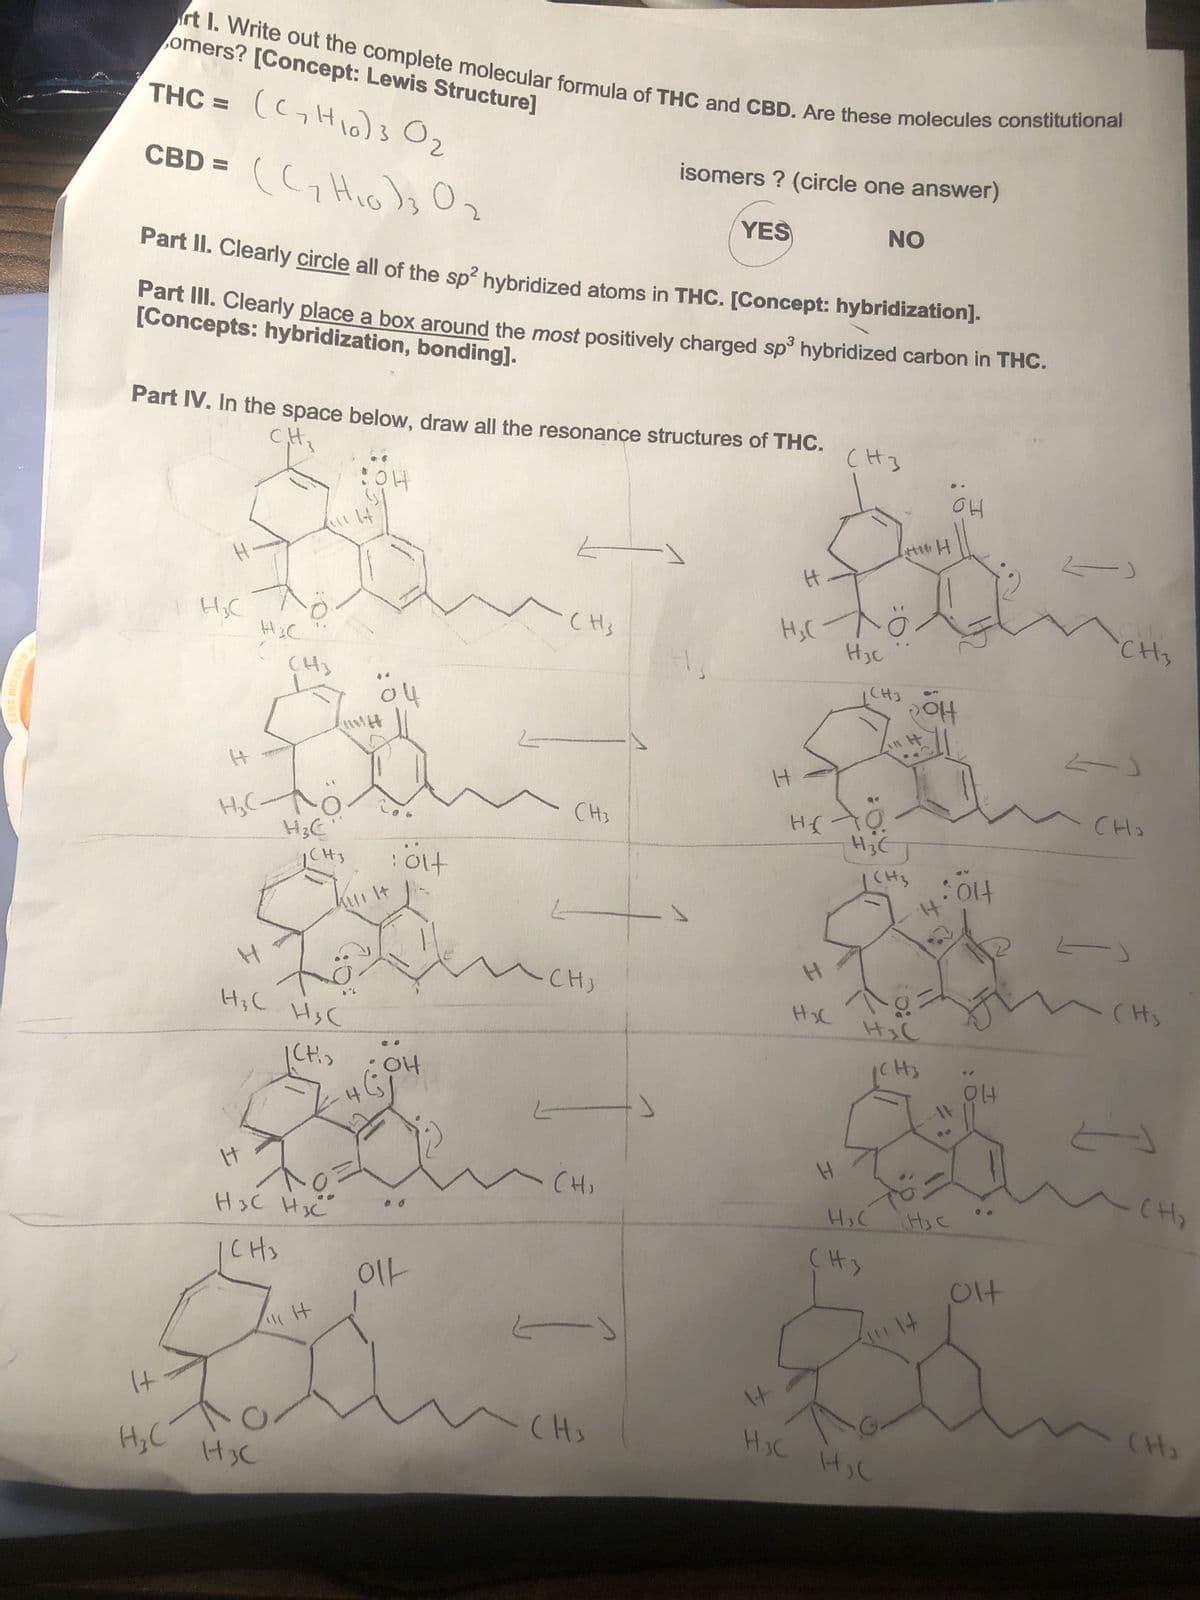 ОТСОН
2022
rt 1. Write out the complete molecular formula of THC and CBD. Are these molecules constitutional
omers? [Concept: Lewis Structure]
THC = (C, H)3 Ог
CBD =
н
(ст Нодь Ог
Part II. Clearly circle all of the sp² hybridized atoms in THC. [Concept: hybridization).
[Concepts: hybridization, bonding].
Part III. Clearly place a box around the most positively charged sp³ hybridized carbon in THC.
Part IV. In the space below, draw all the resonance structures of THC.
C₁H₂
애
H=C
H
HC-
H
H3C
H3C
Н
HC Hхс
CH₂
H3C
СН3
H₂C
(CH,
НЗС НЗС
Снз
оч
: alt
он
이
L
-
CH3
Е
и сн
-
CH3
- сн
isomers ? (circle one answer)
YES
- (H3
Н
Н
H=C
Н
H3C
H
H₂C
СН3
H3c
HS →
NO
H3C
H
H3C
(H 3
СН3
унто н
H₂(
рон
CH3 :olf
H=C
H
82
(H3
H₂C
애
14
애
olf
2)
CH₂
<
- сно
-)
(Hs
2
- сн
(H)